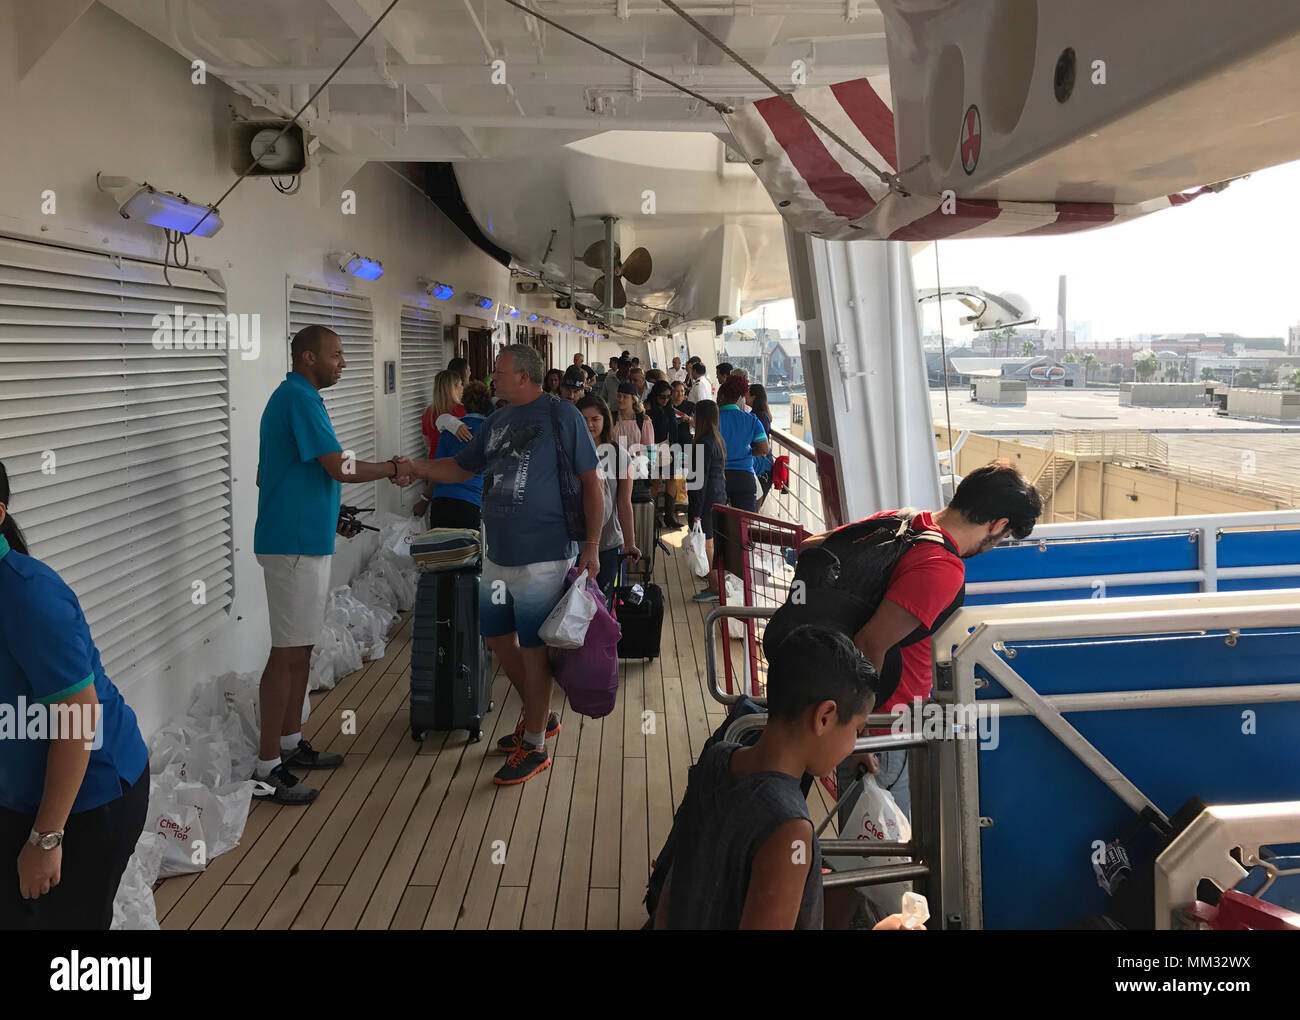 Passengers aboard the Carnival cruise ship Freedom disembark in Galveston, Texas, Sept. 1, 2017. The passengers were stranded at sea for an additional six days due to Hurricane Harvey. (U.S. Coast Guard photo by Petty Officer 2nd Class Jonathan Klingenberg/Released) Stock Photo